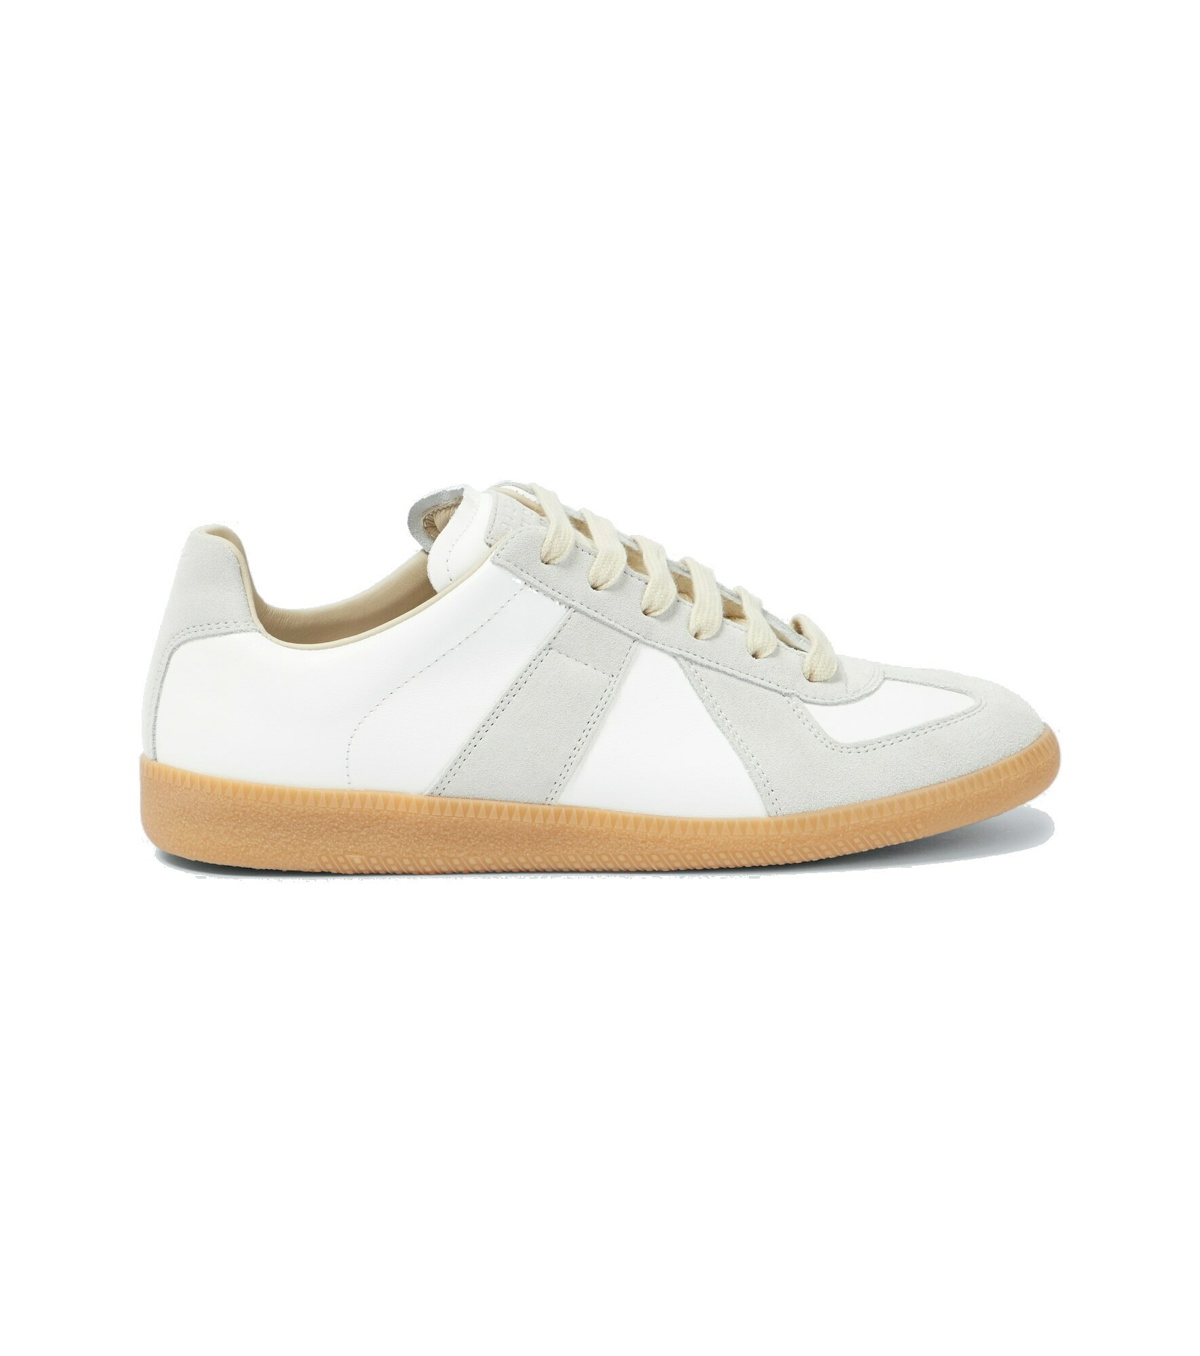 Photo: Maison Margiela - Replica leather and suede sneakers